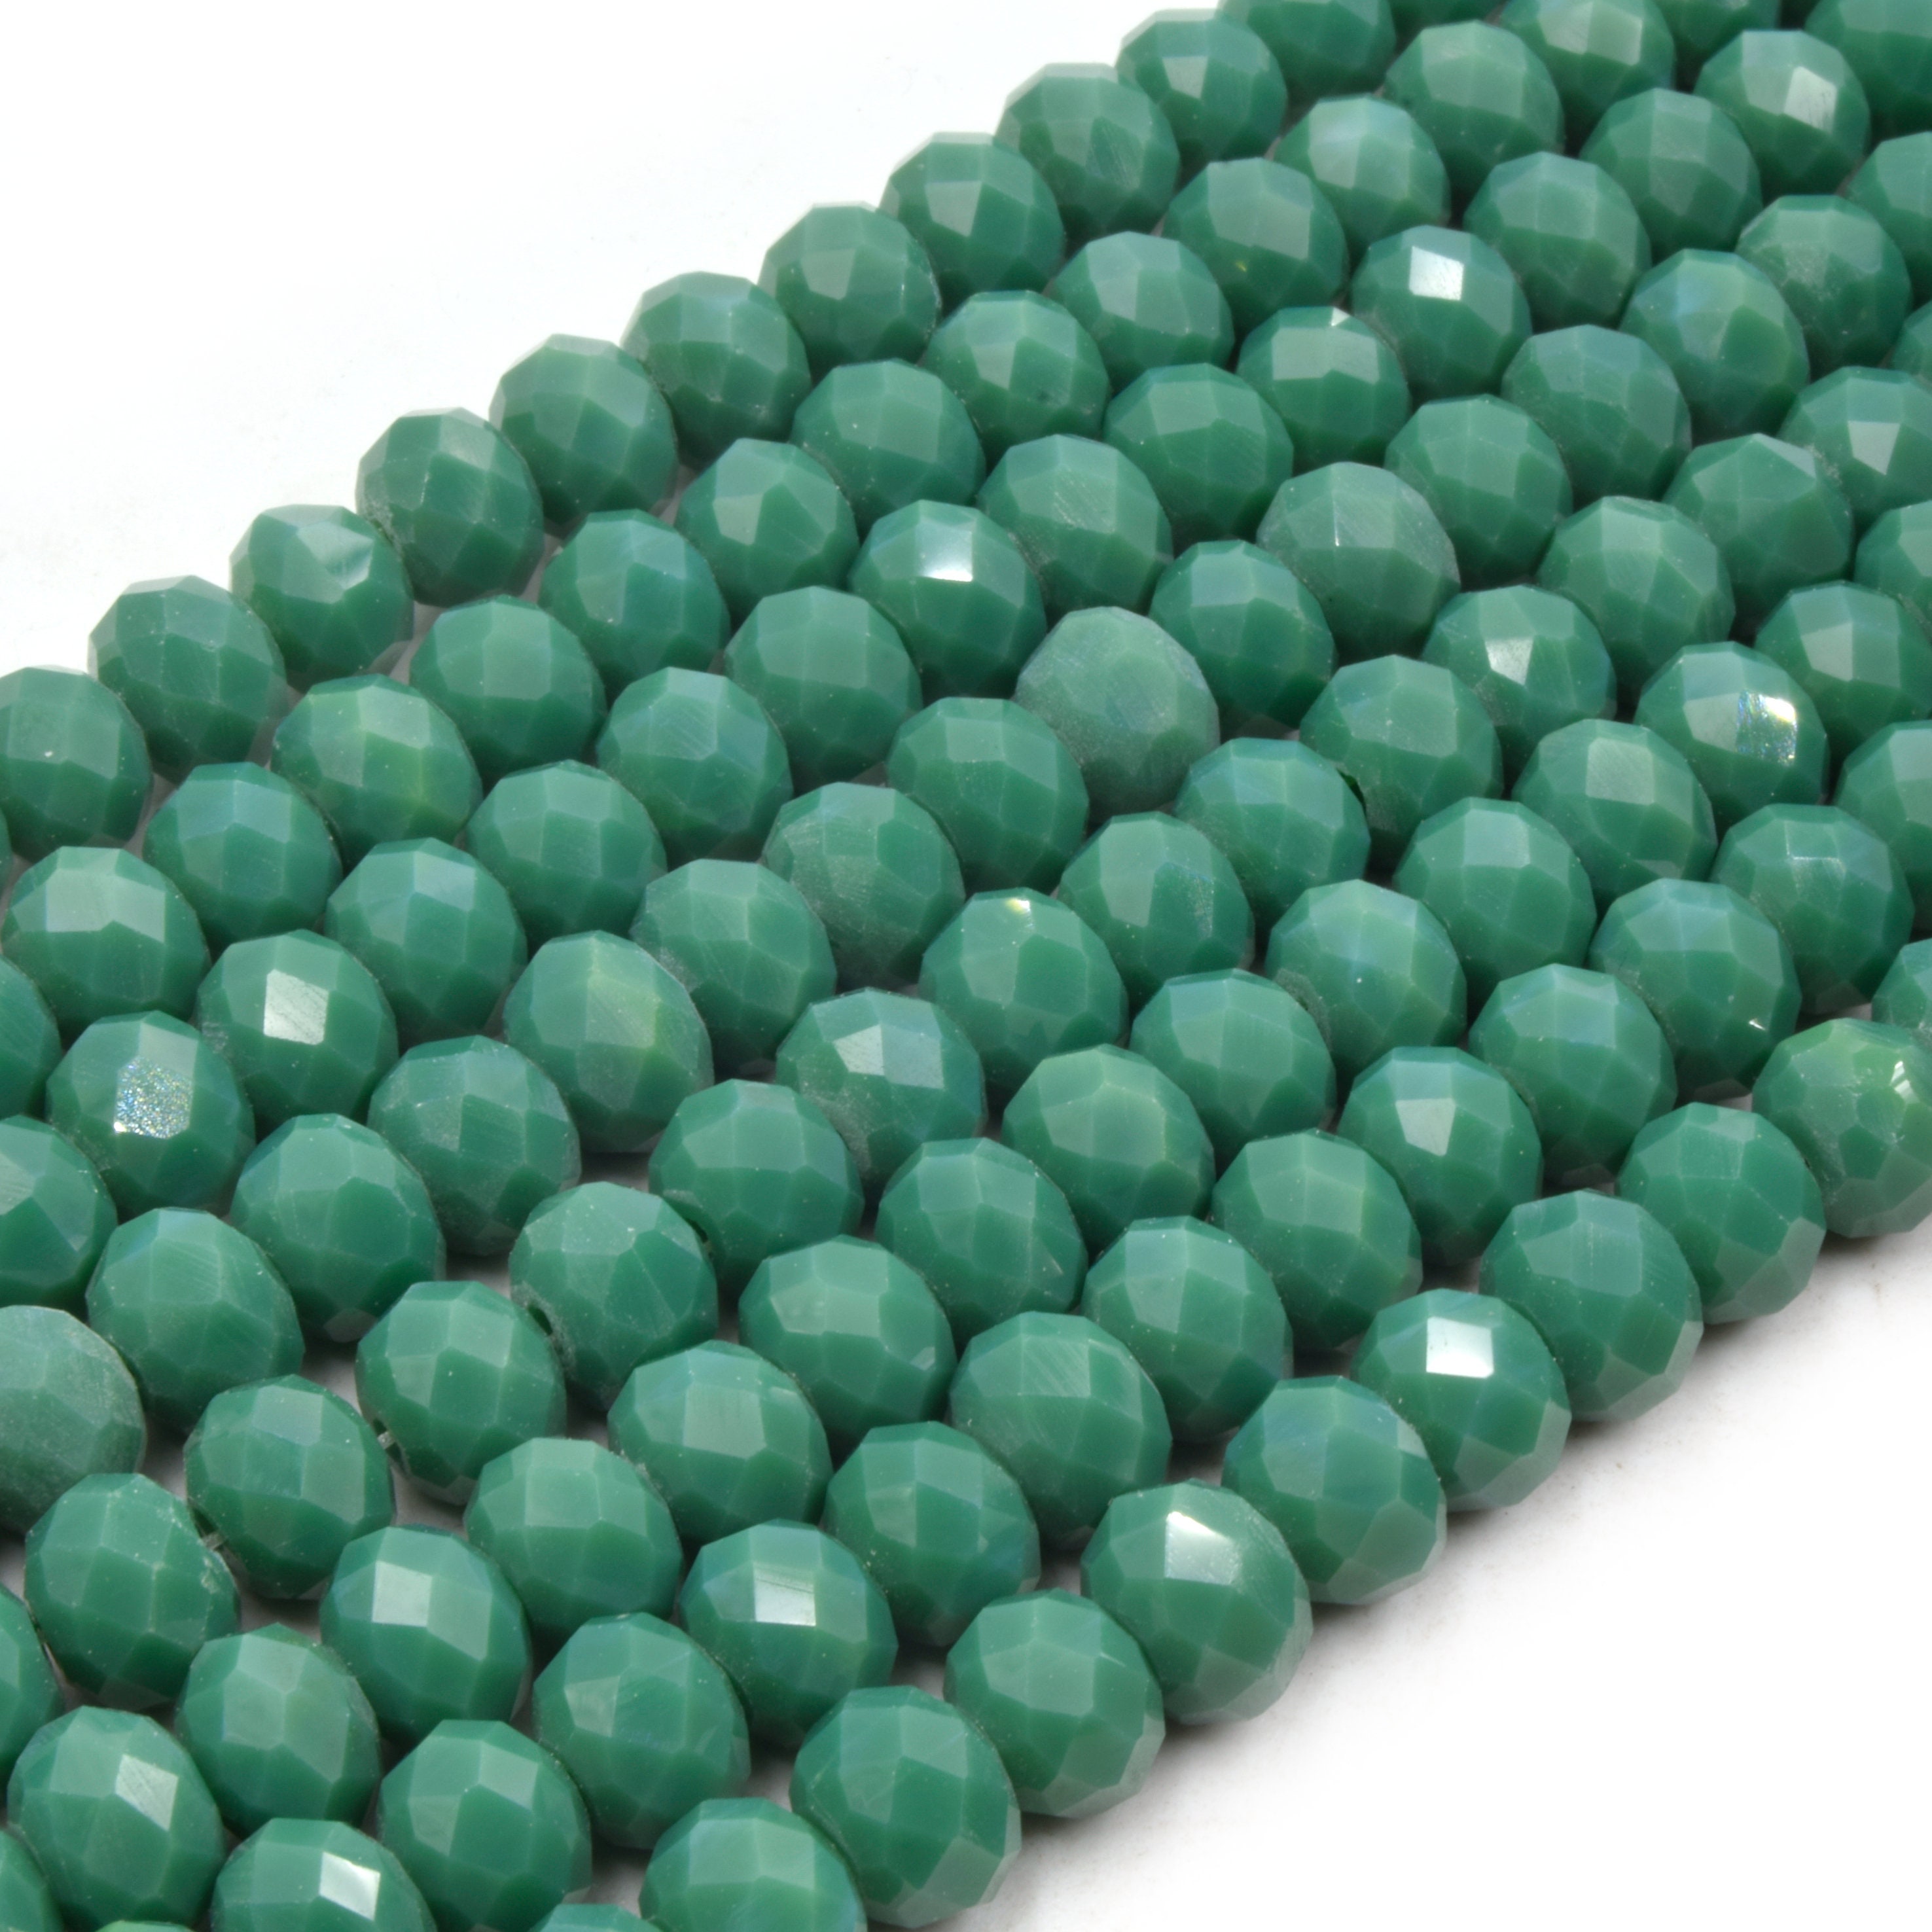 Crystal Iridescent Green 16x12mm Faceted Oval Chinese Crystal Glass Beads  per Strand